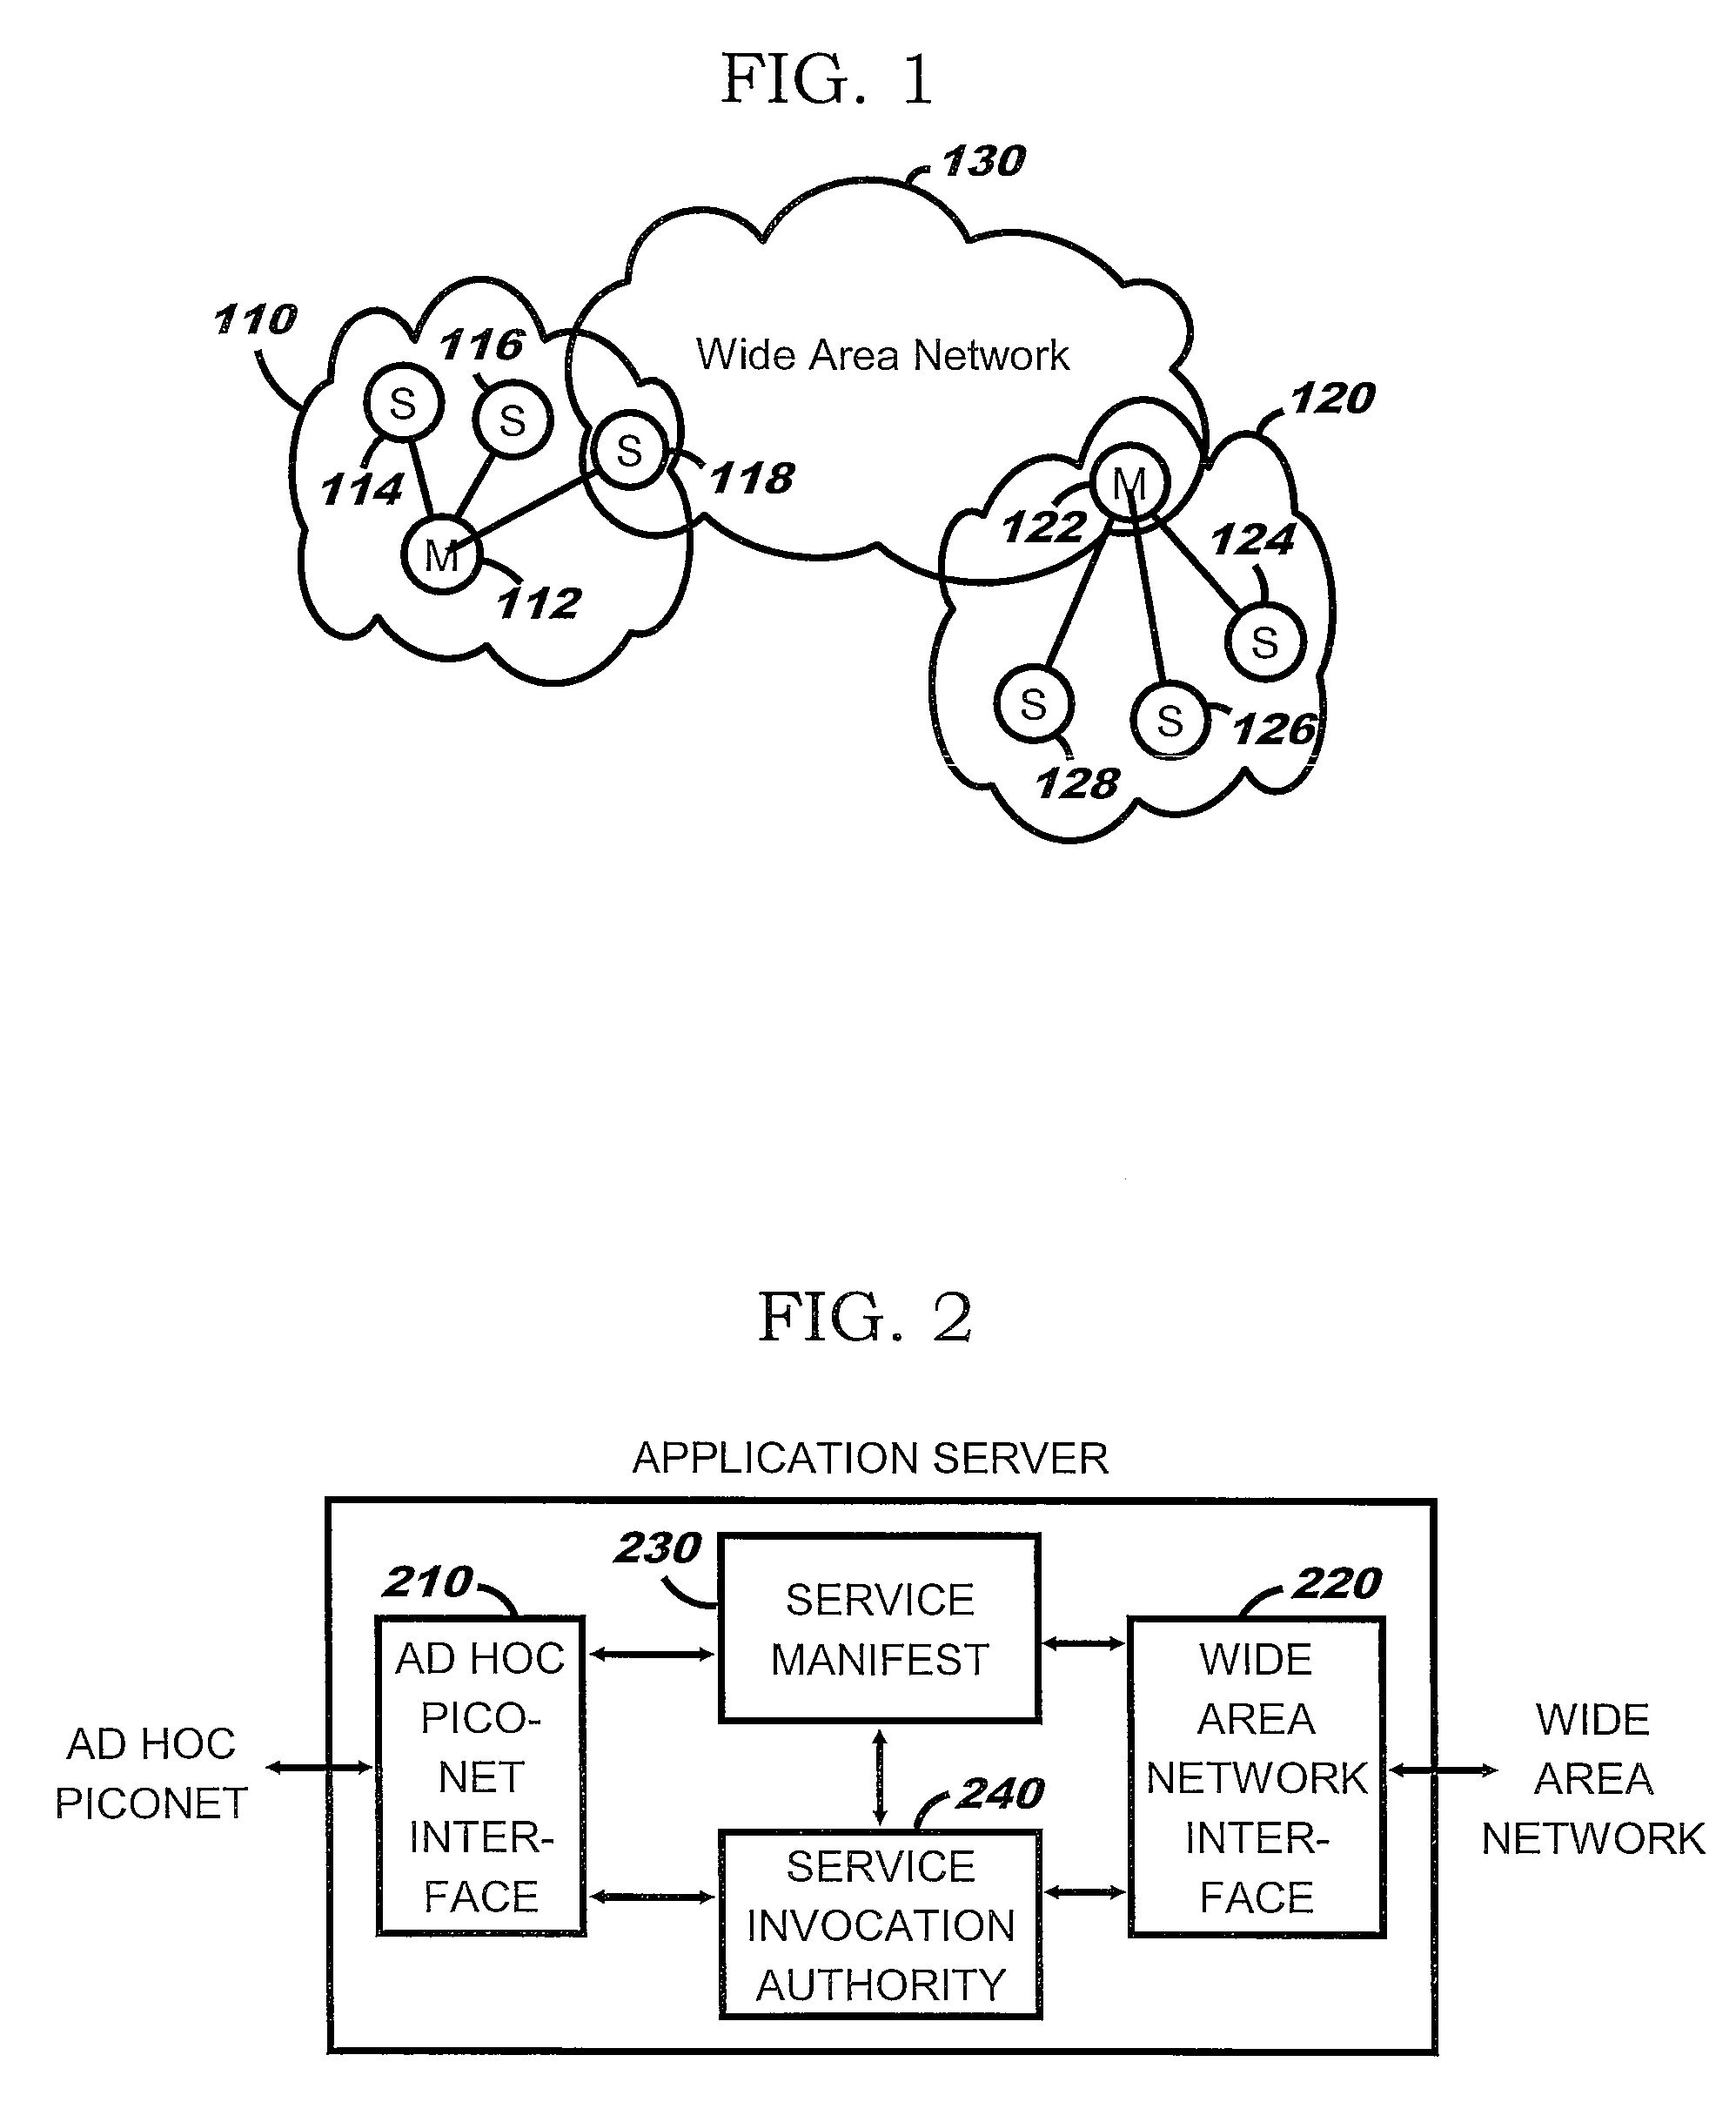 Computer Program Products for Connecting Ad Hoc Piconets to Wide Area Networks